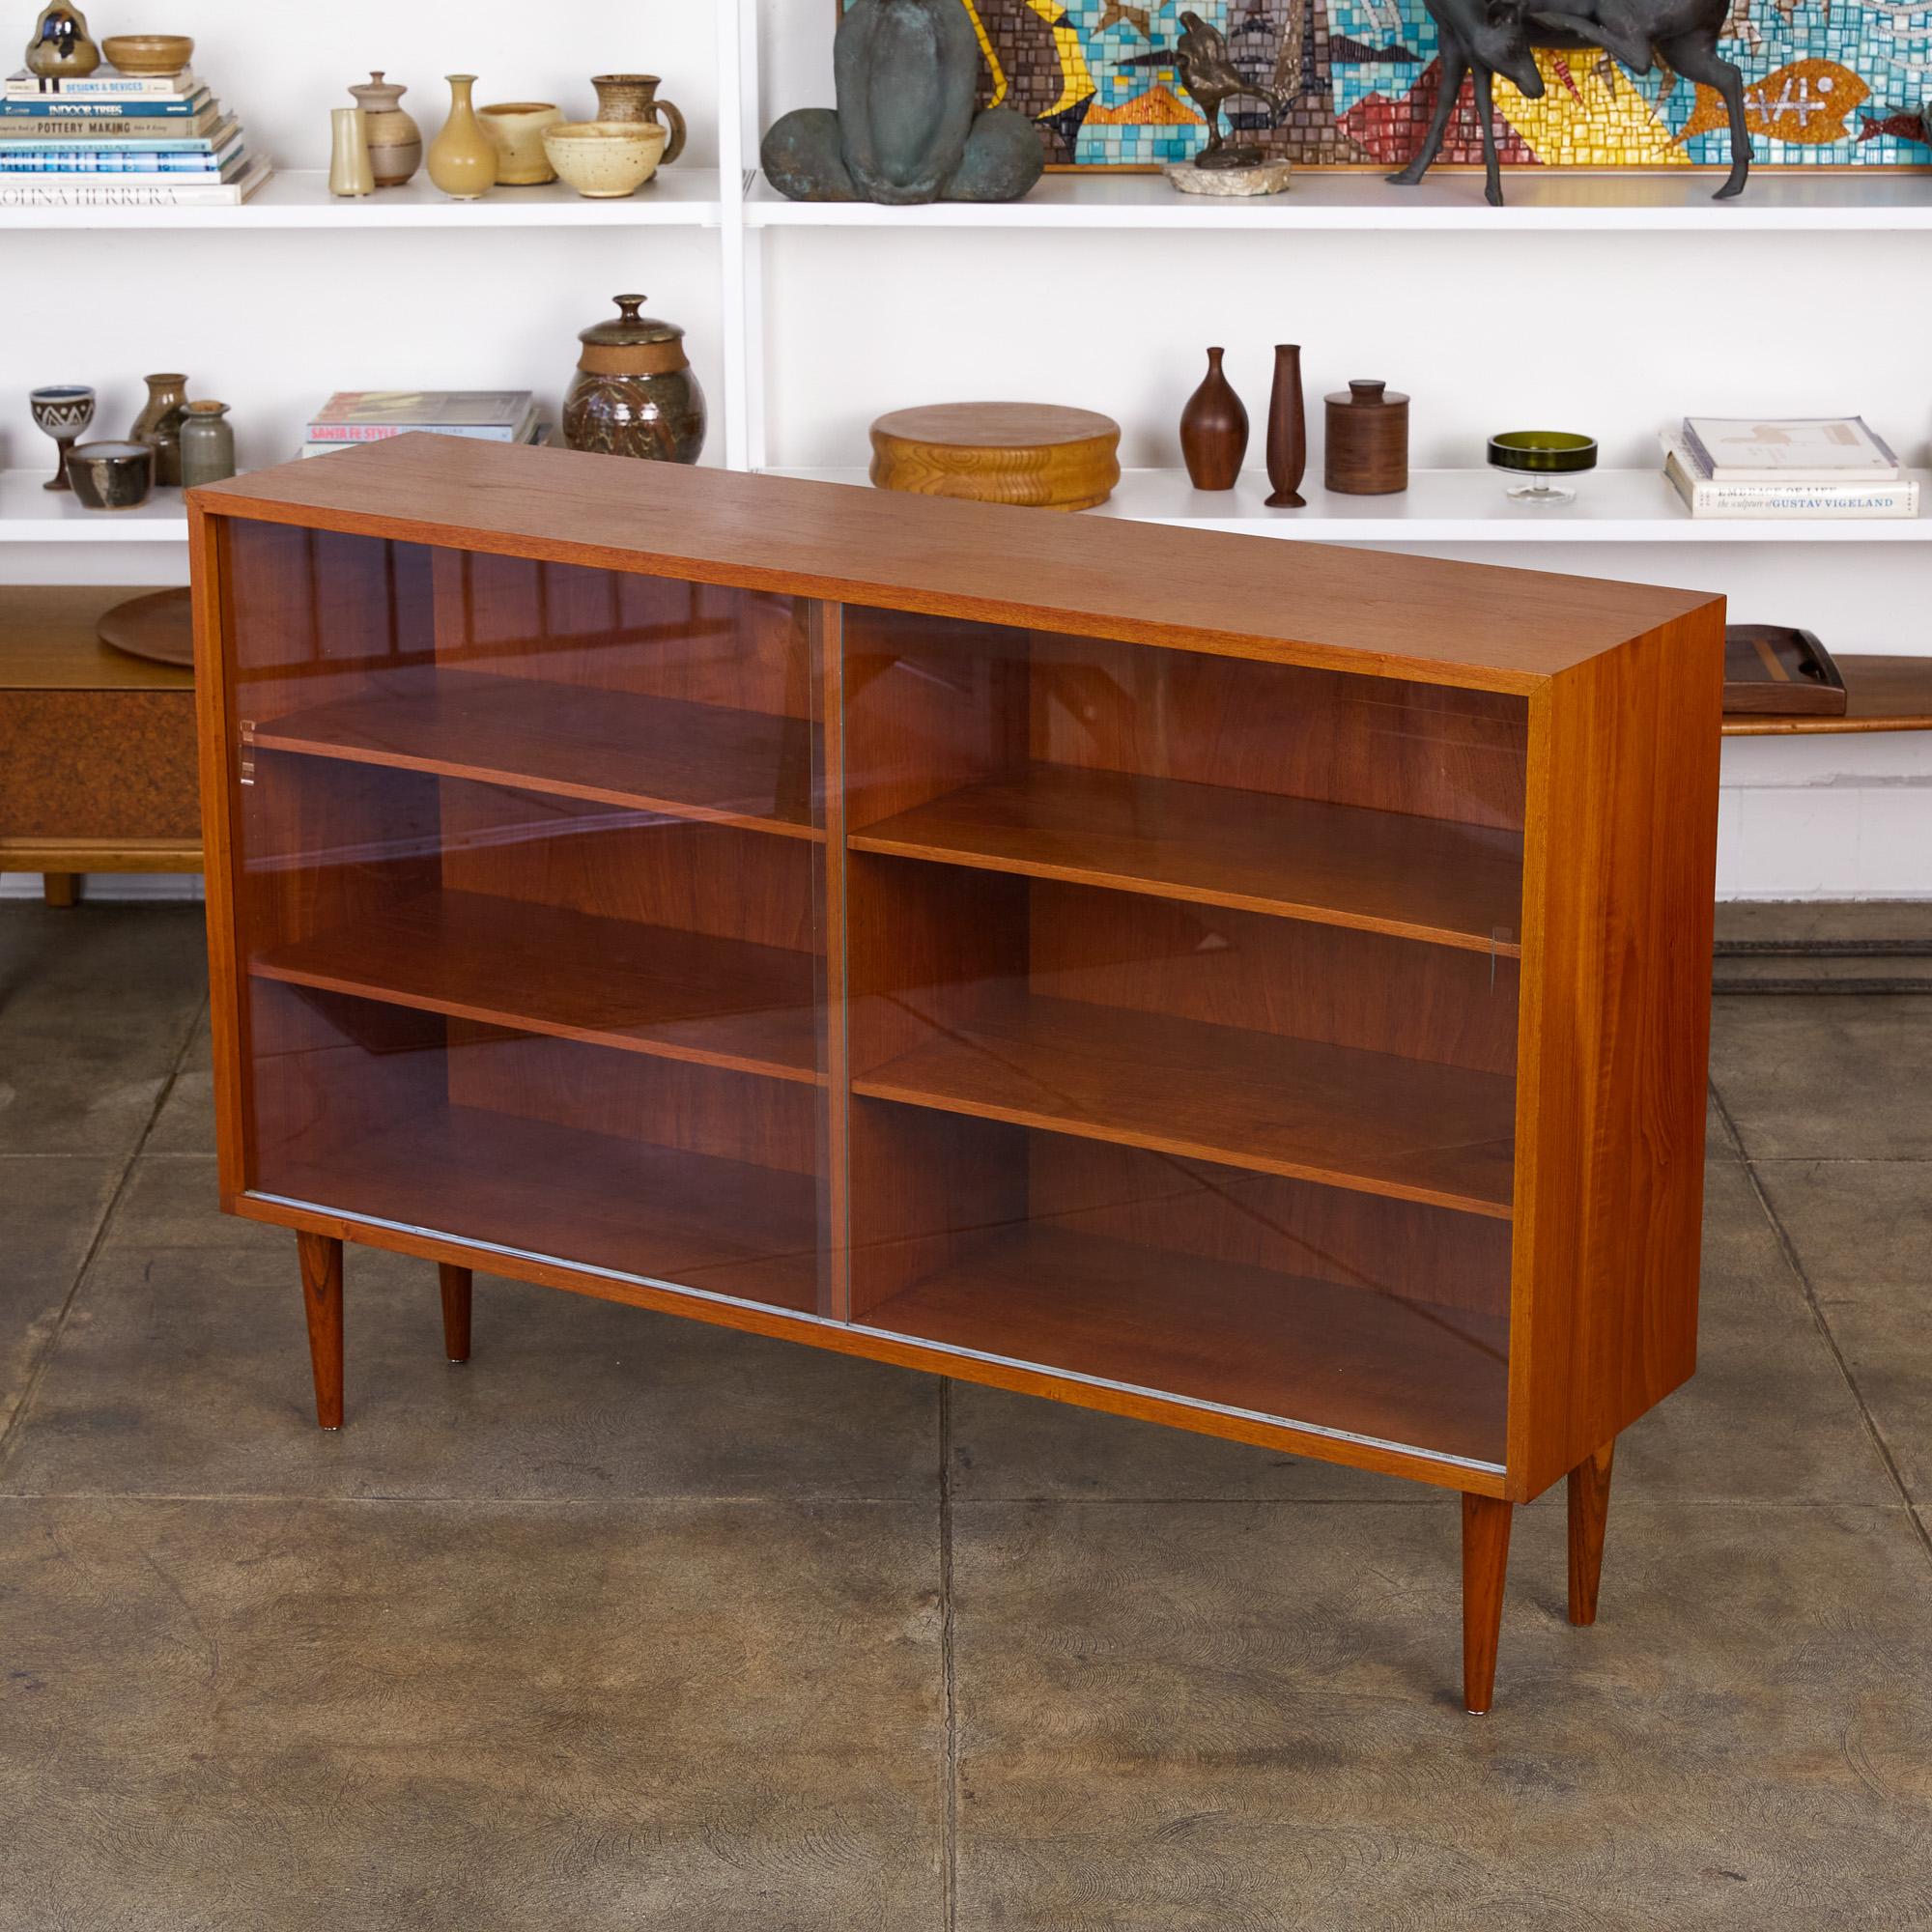 Børge Mogensen teak bookcase for Aalborg, Denmark, circa 1950s. The cabinet features a slender teak exterior frame and tapered turned legs. It has glass sliding door openings and four adjustable shelves.

Dimensions: 54.25” width x 13.5” depth x